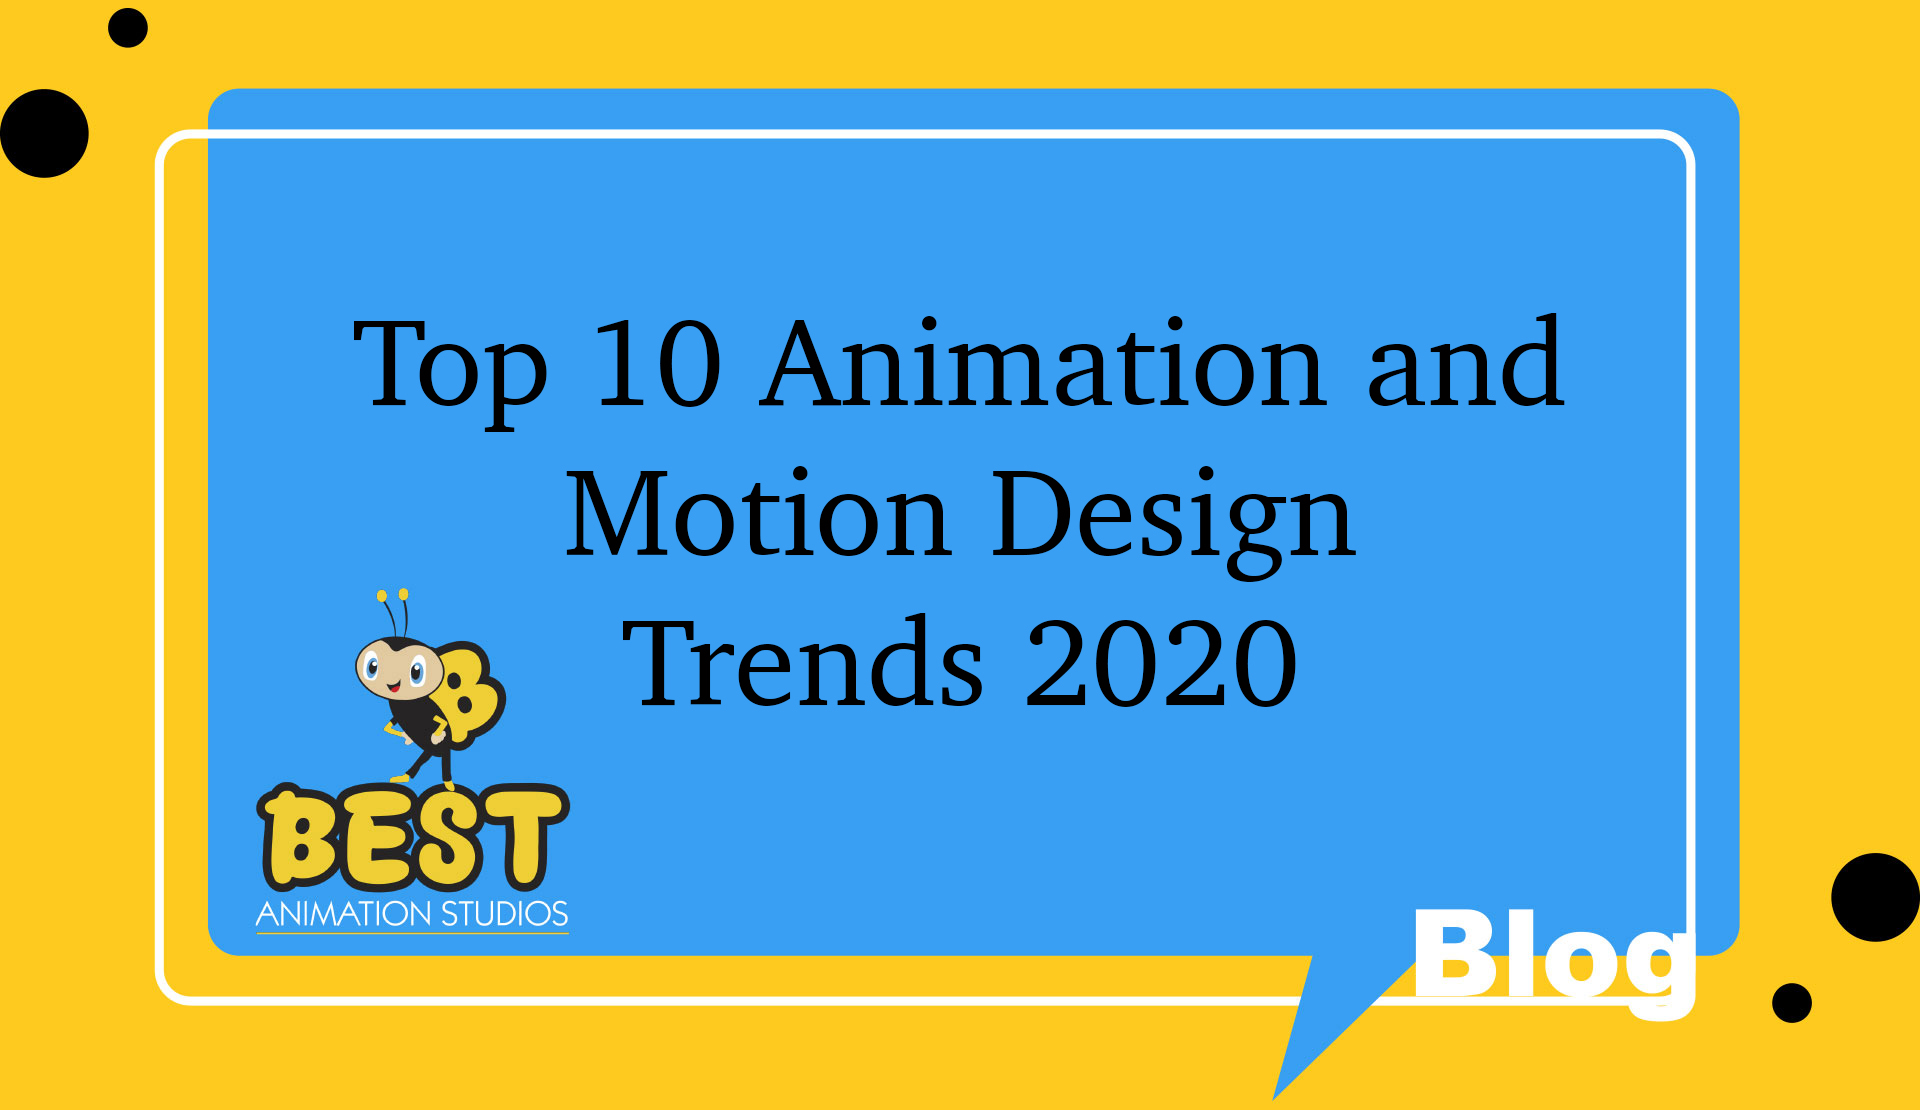 Top 10 animation and motion design trends-2020